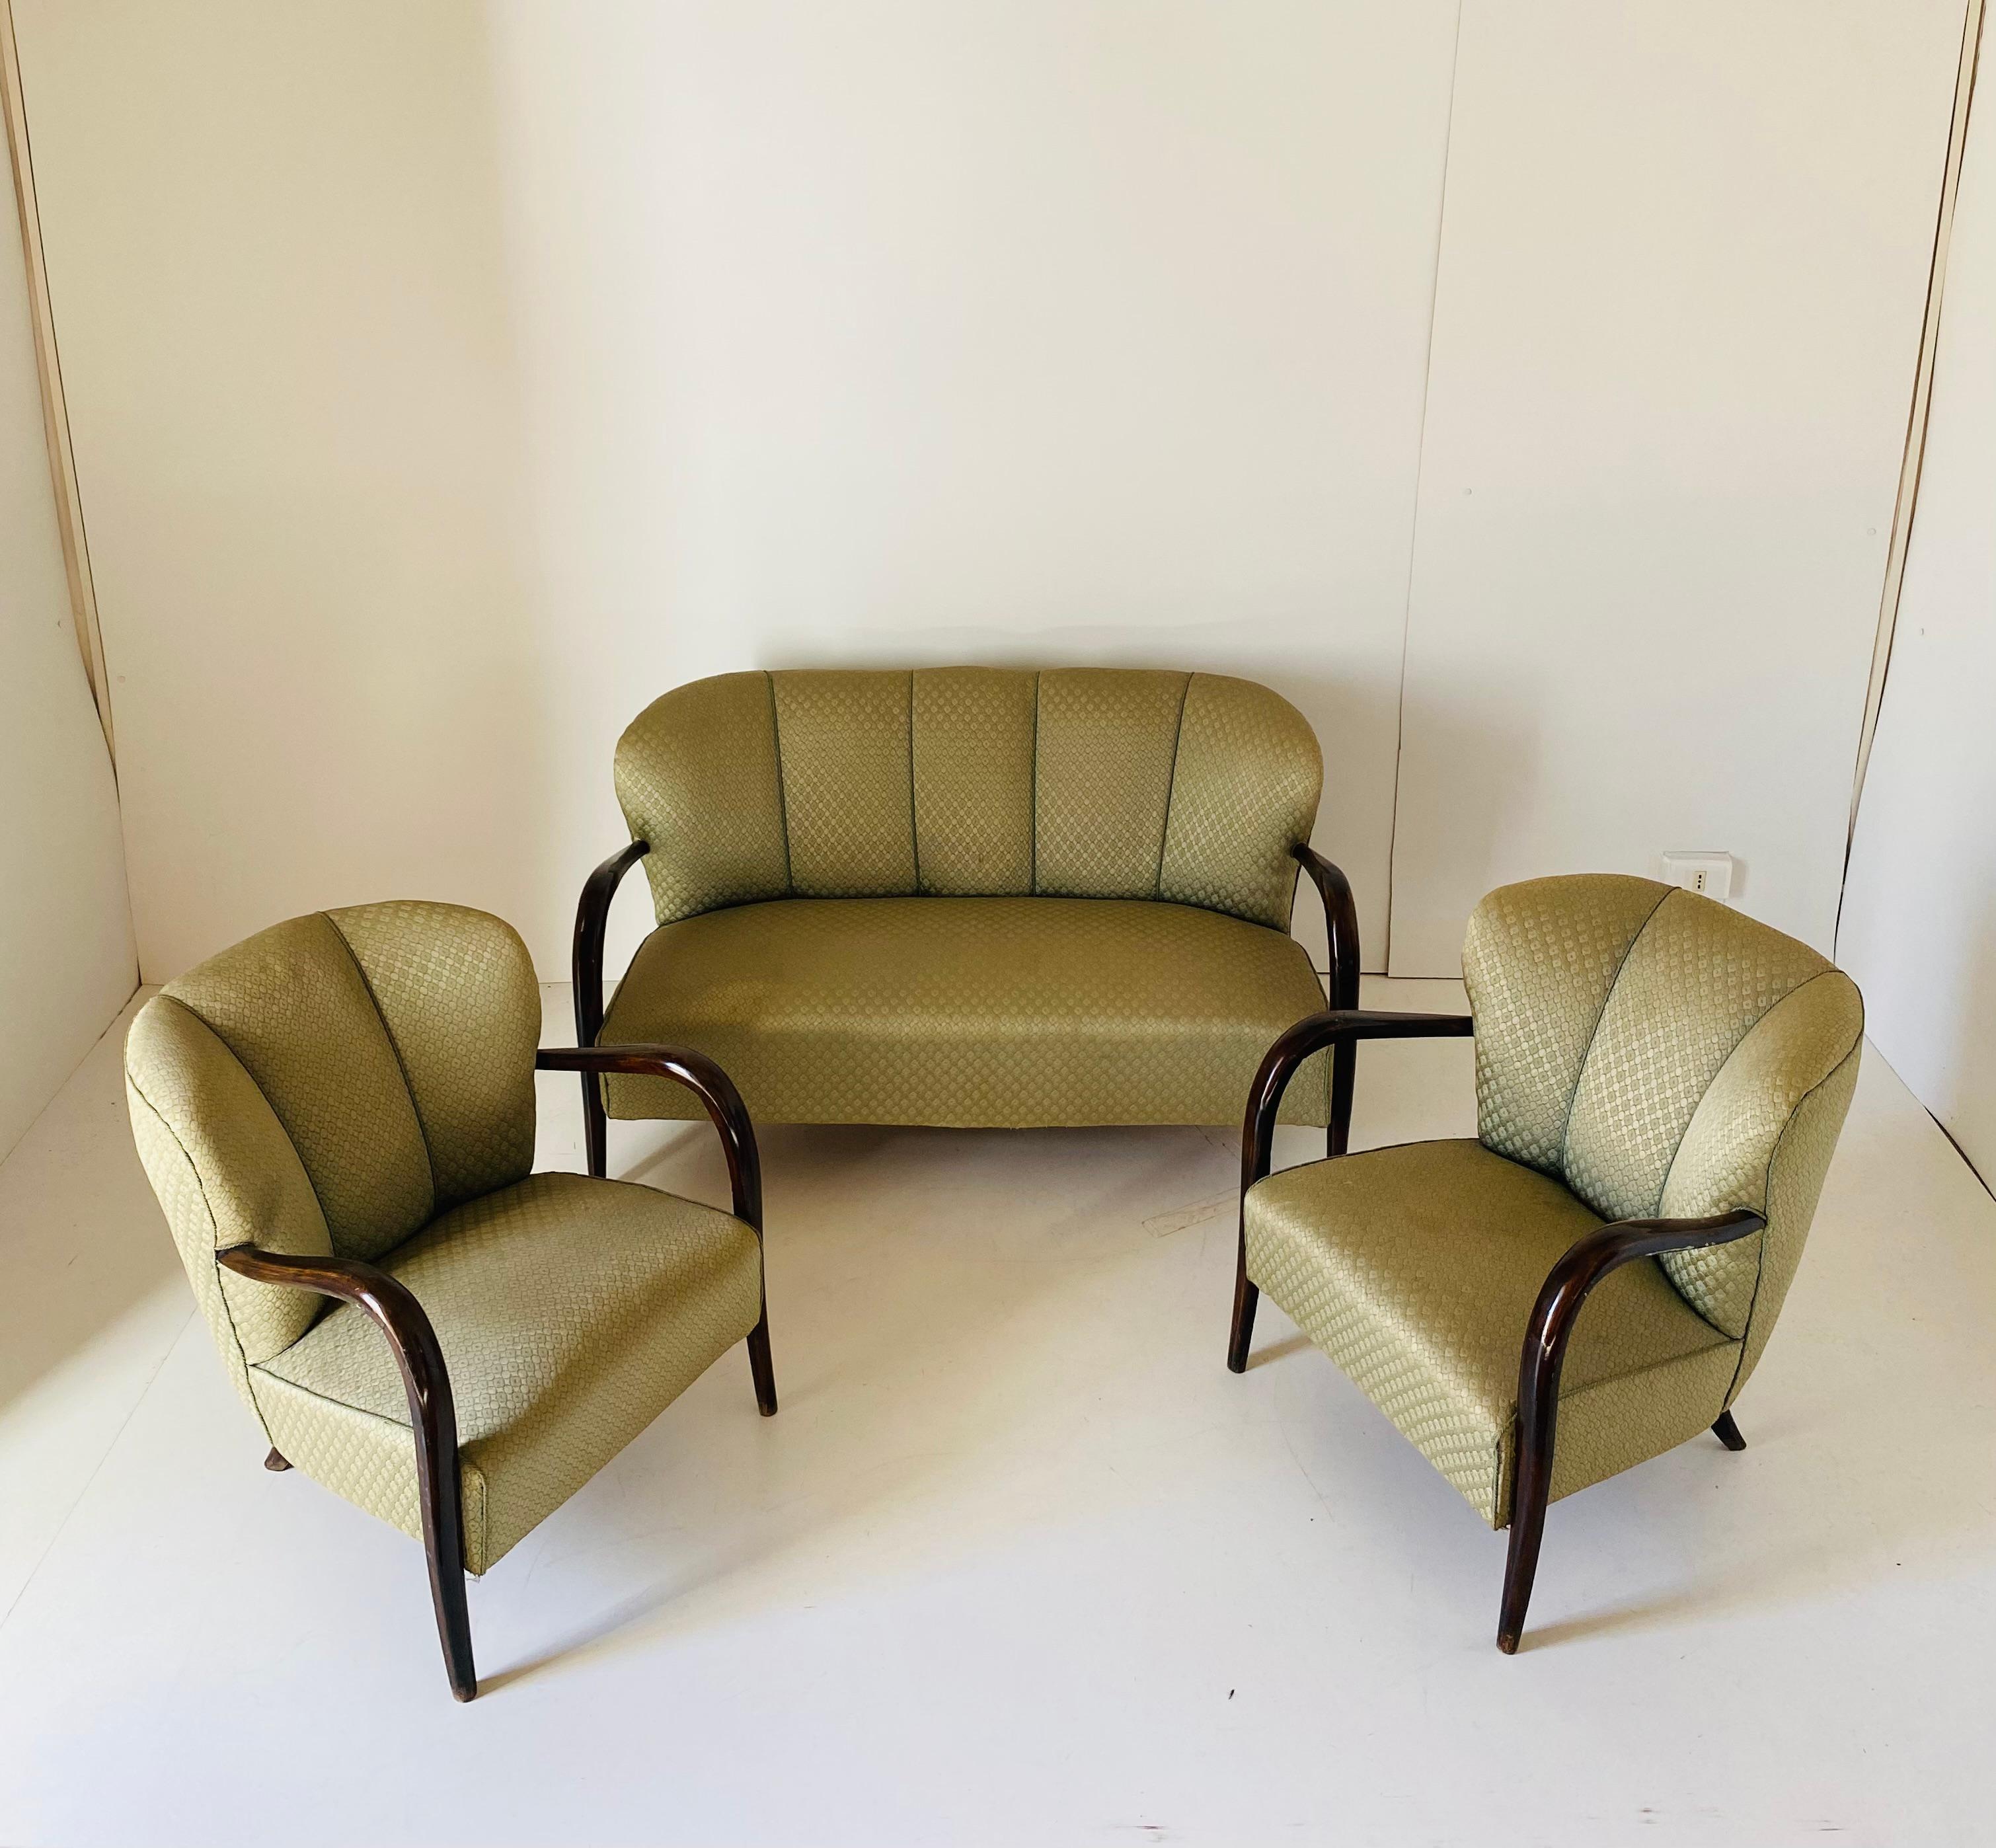 A rare Art Deco living room set from the 1940s. Beautifully manufactured in France, the set is made of two armchairs and one two seats sofa. Both armchairs and sofa still have their original fabric which is, according to its age, in remarkable